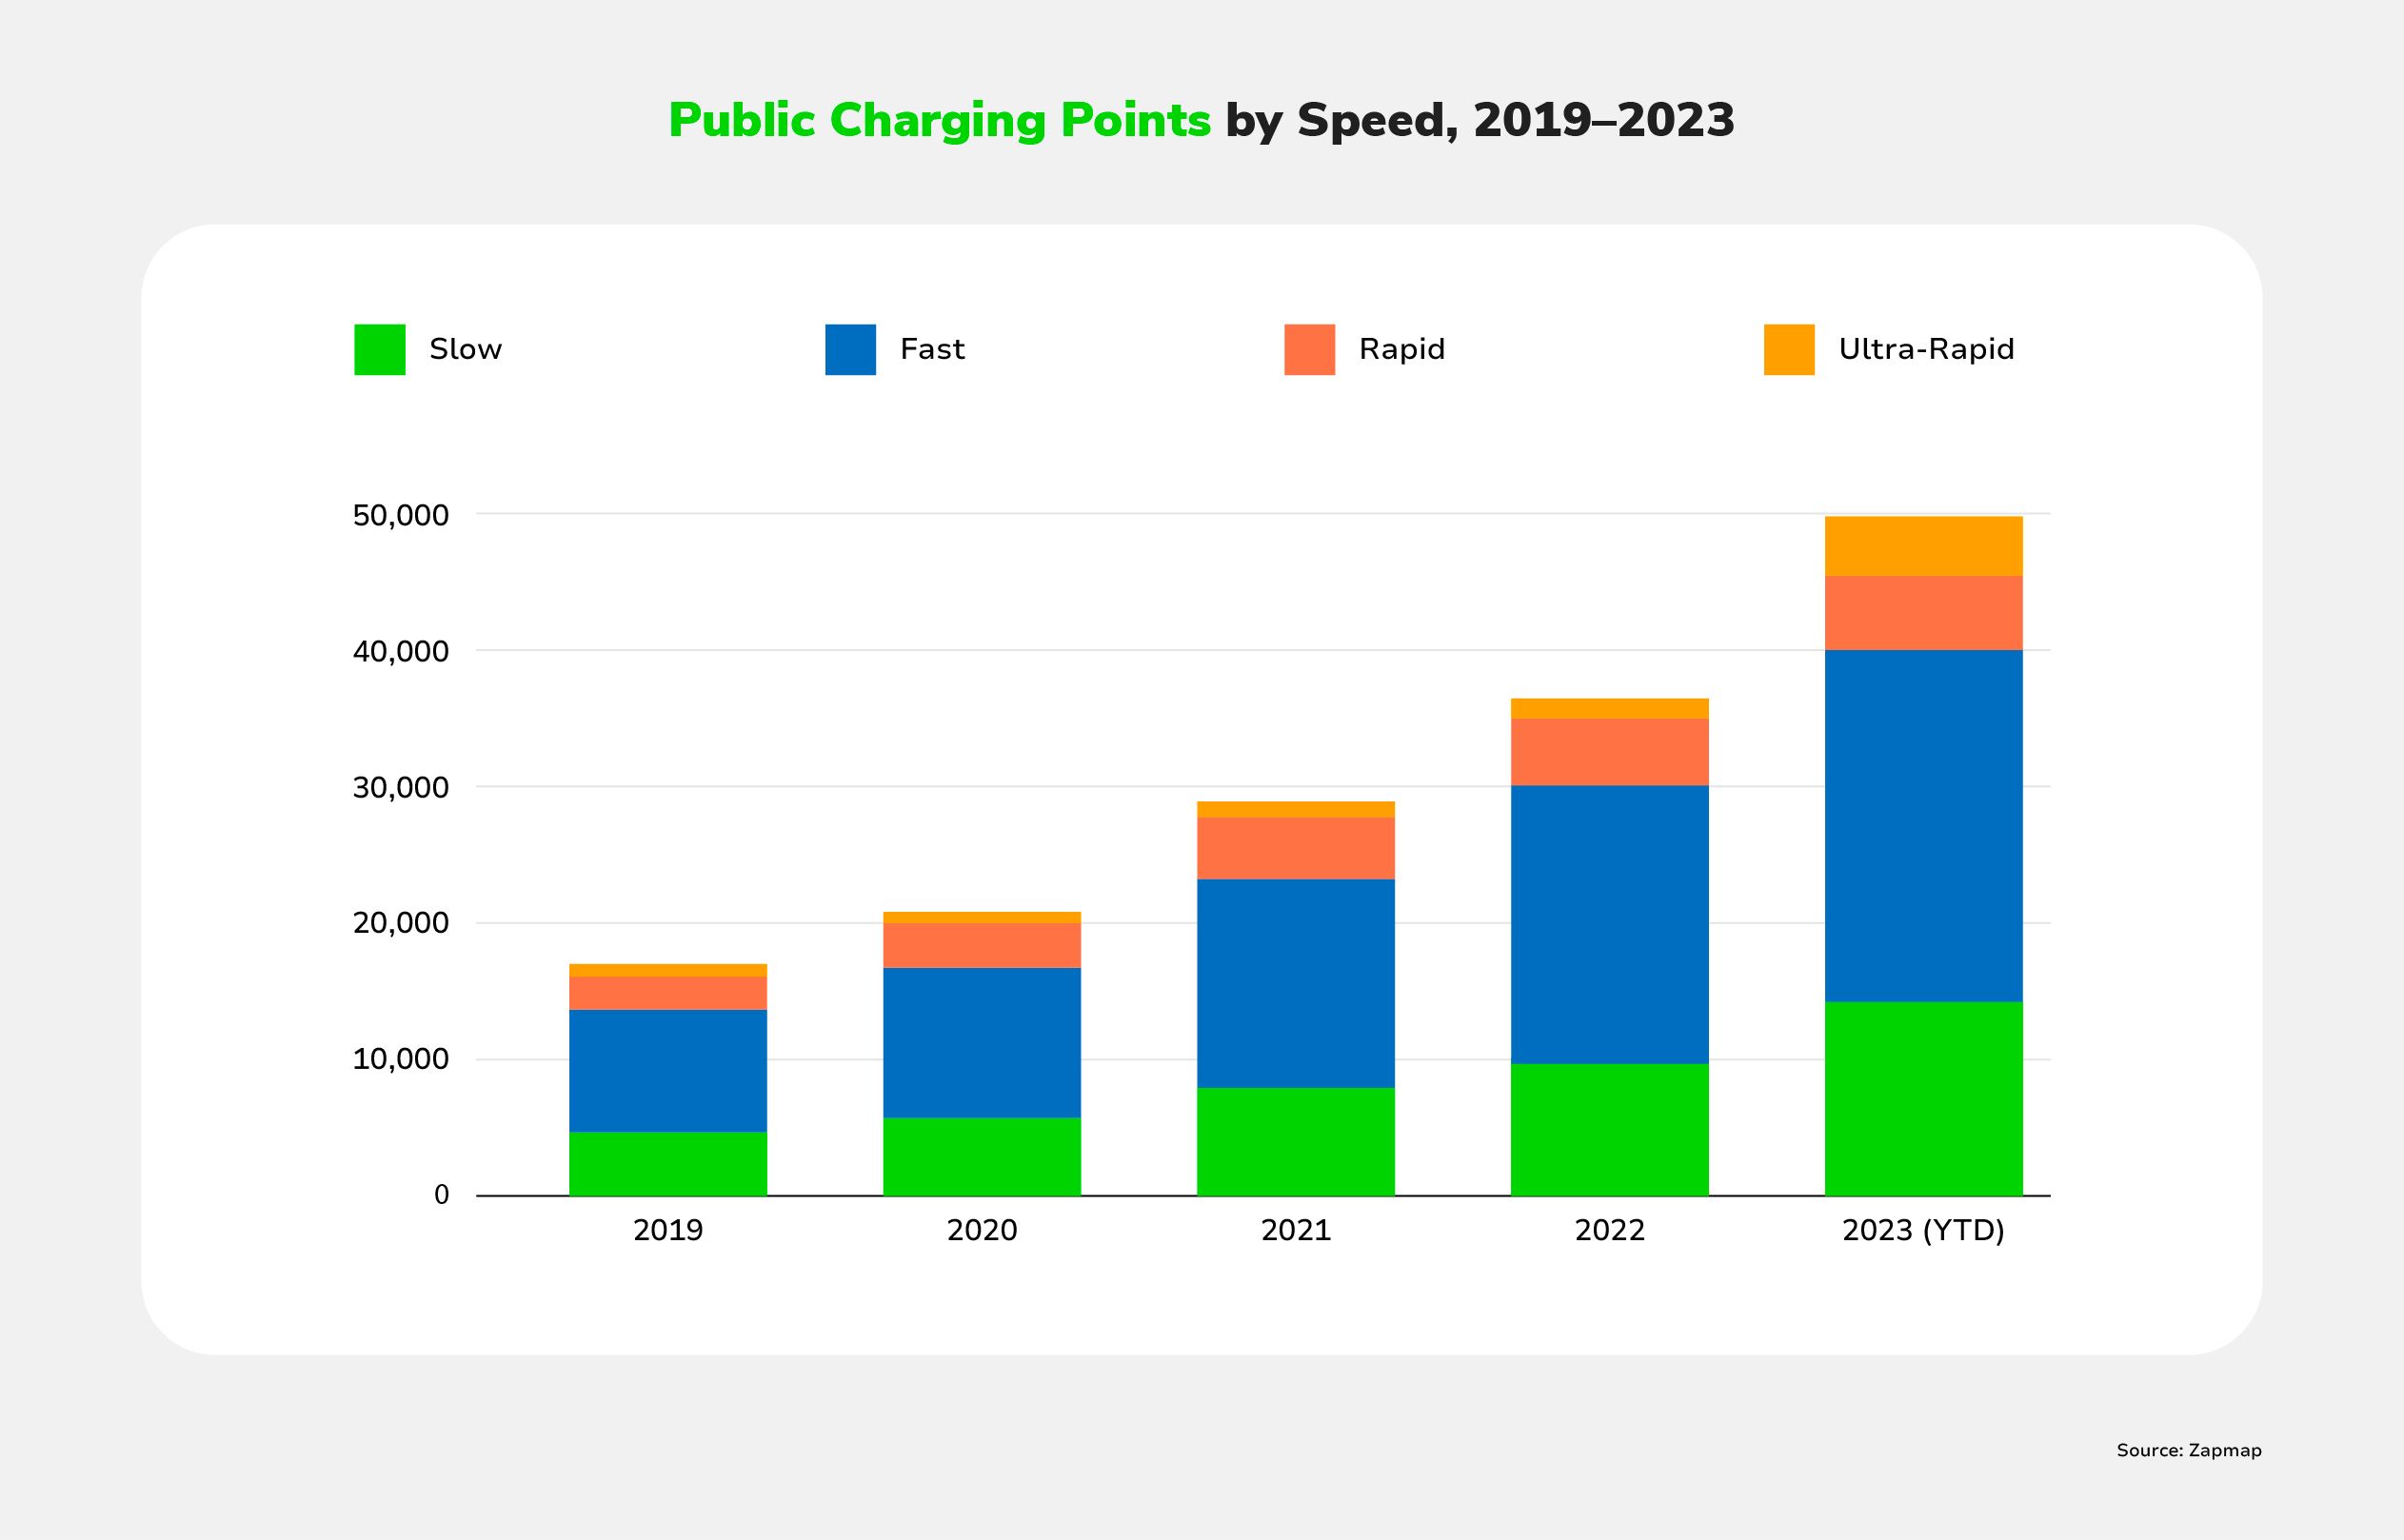 A bar chart showing the UK's public EV charging infrastructure from 2019 to 2023, broken down by charger speed